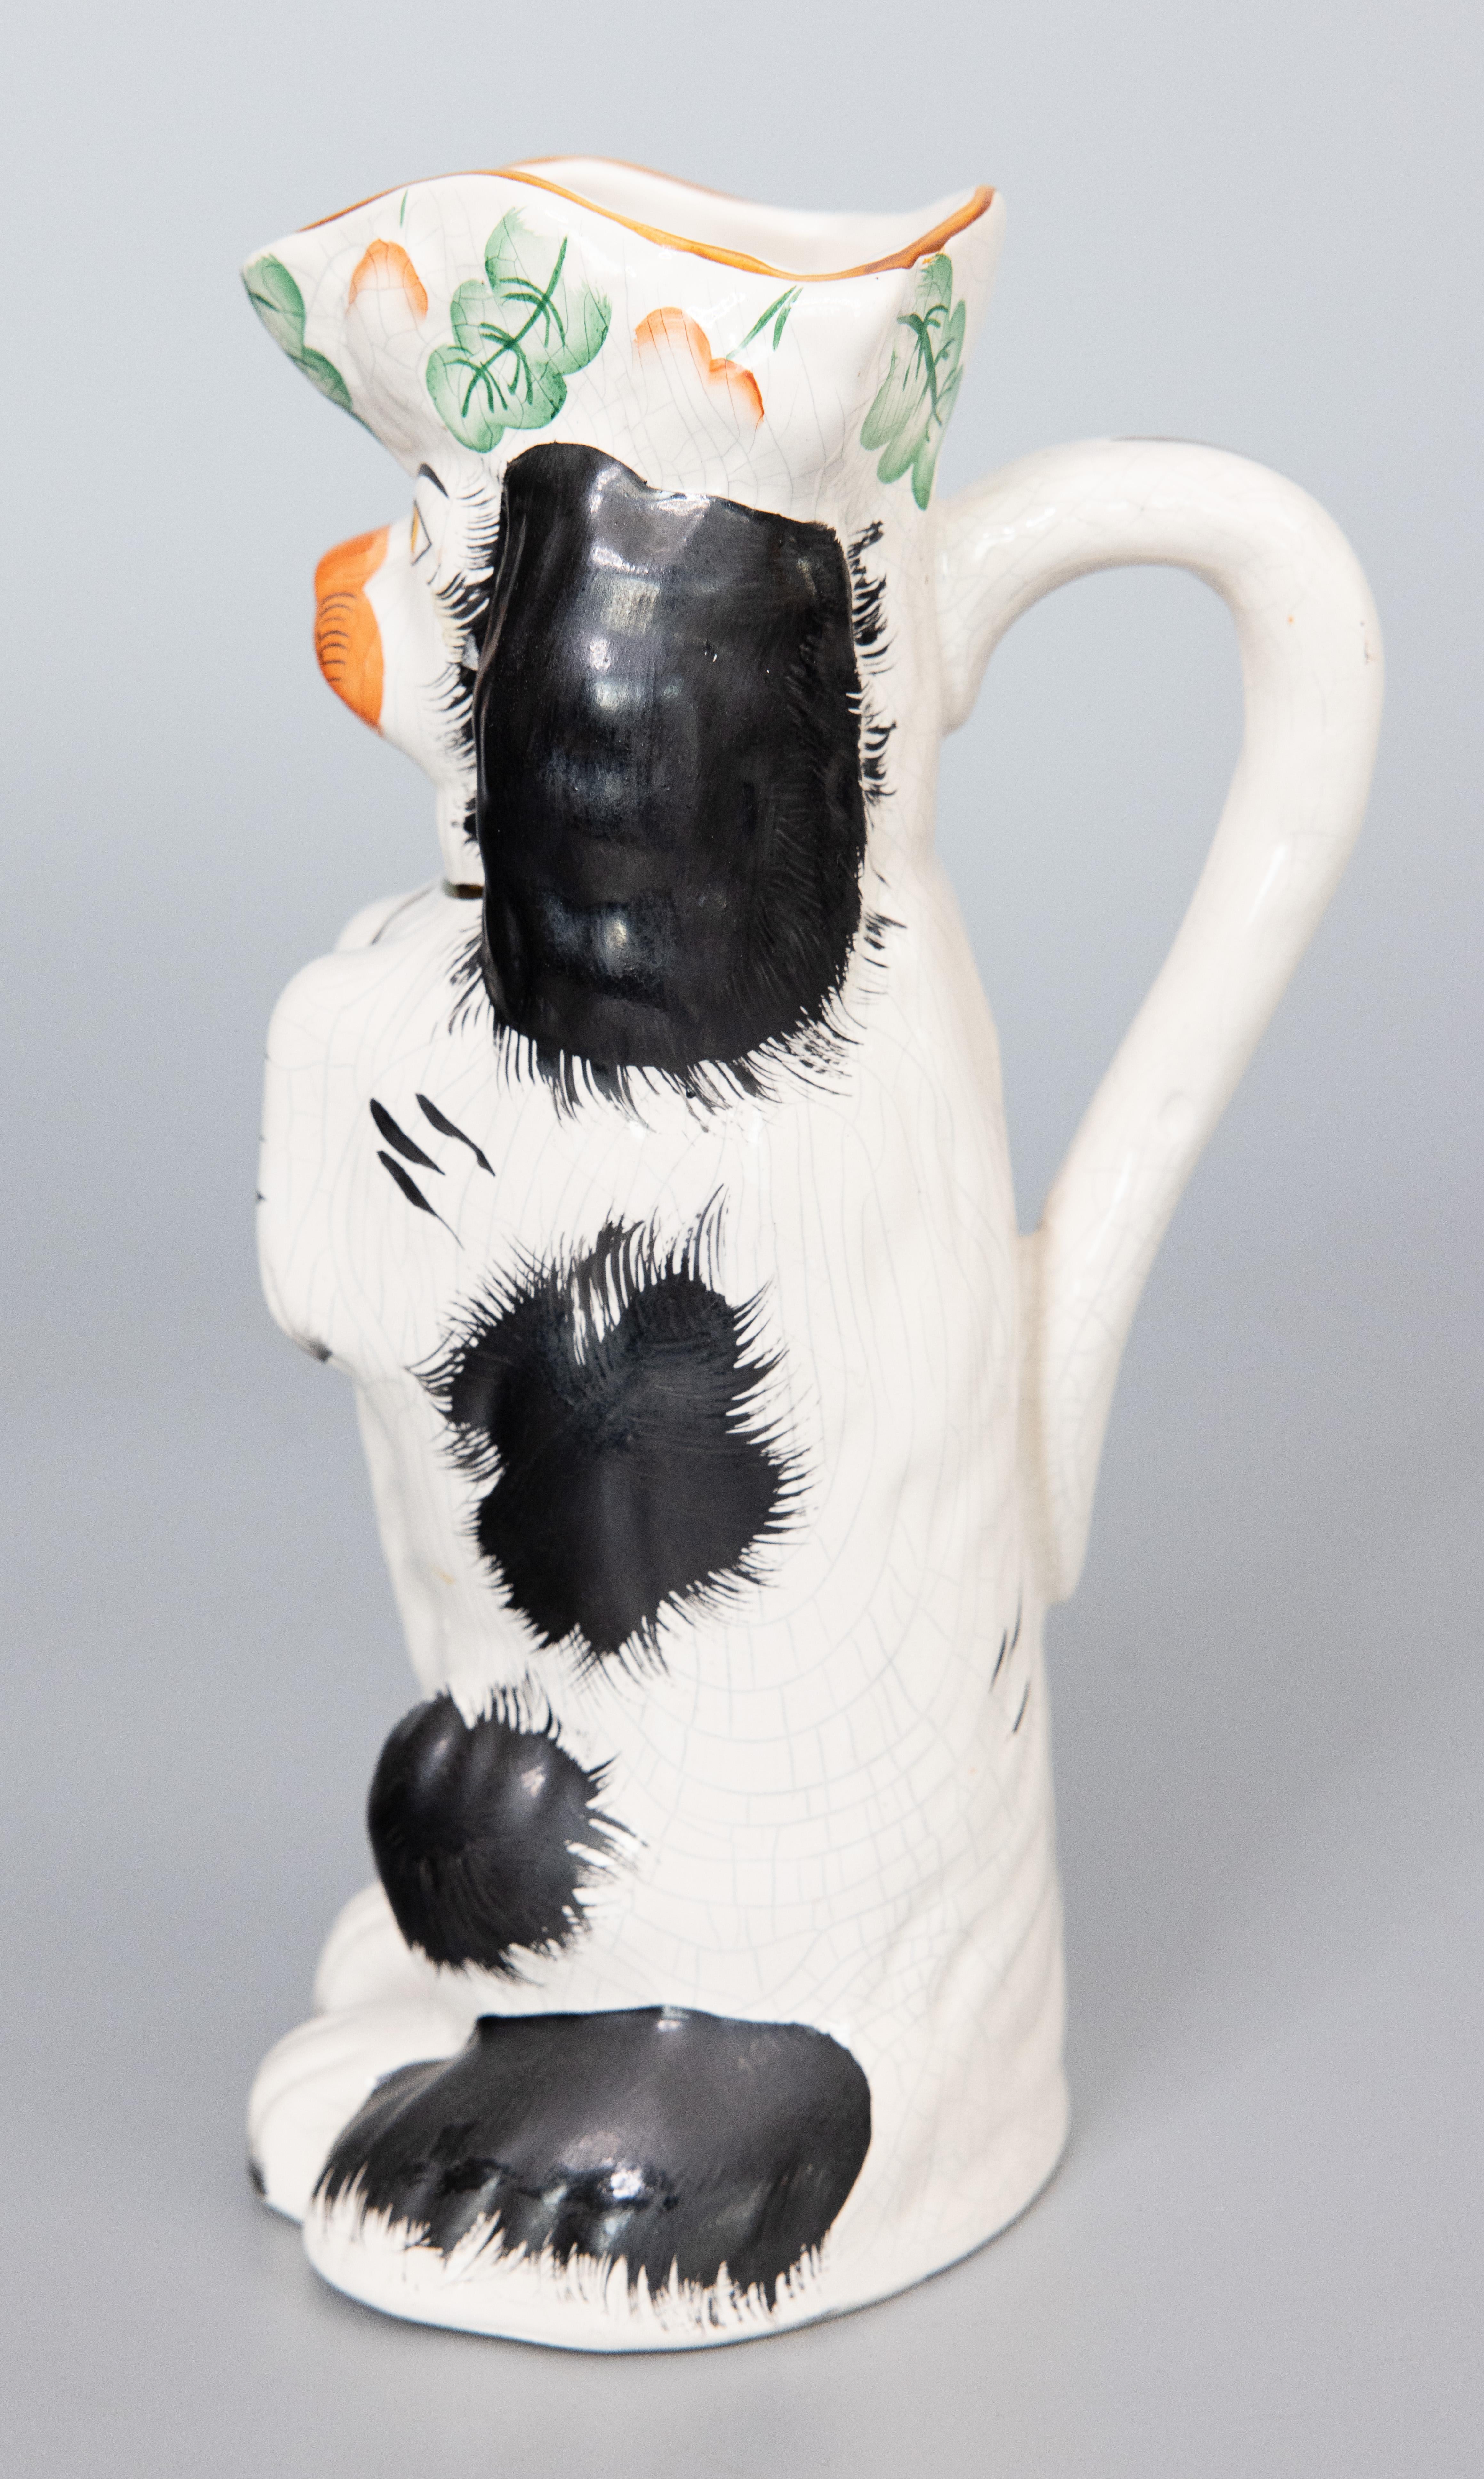 A superb early 20th Century English Staffordshire black and white Spaniel dog pitcher. This charming dog is hand painted with fine details and the sweetest expression. It's hard not to be smitten! It would be wonderful displayed and would be perfect